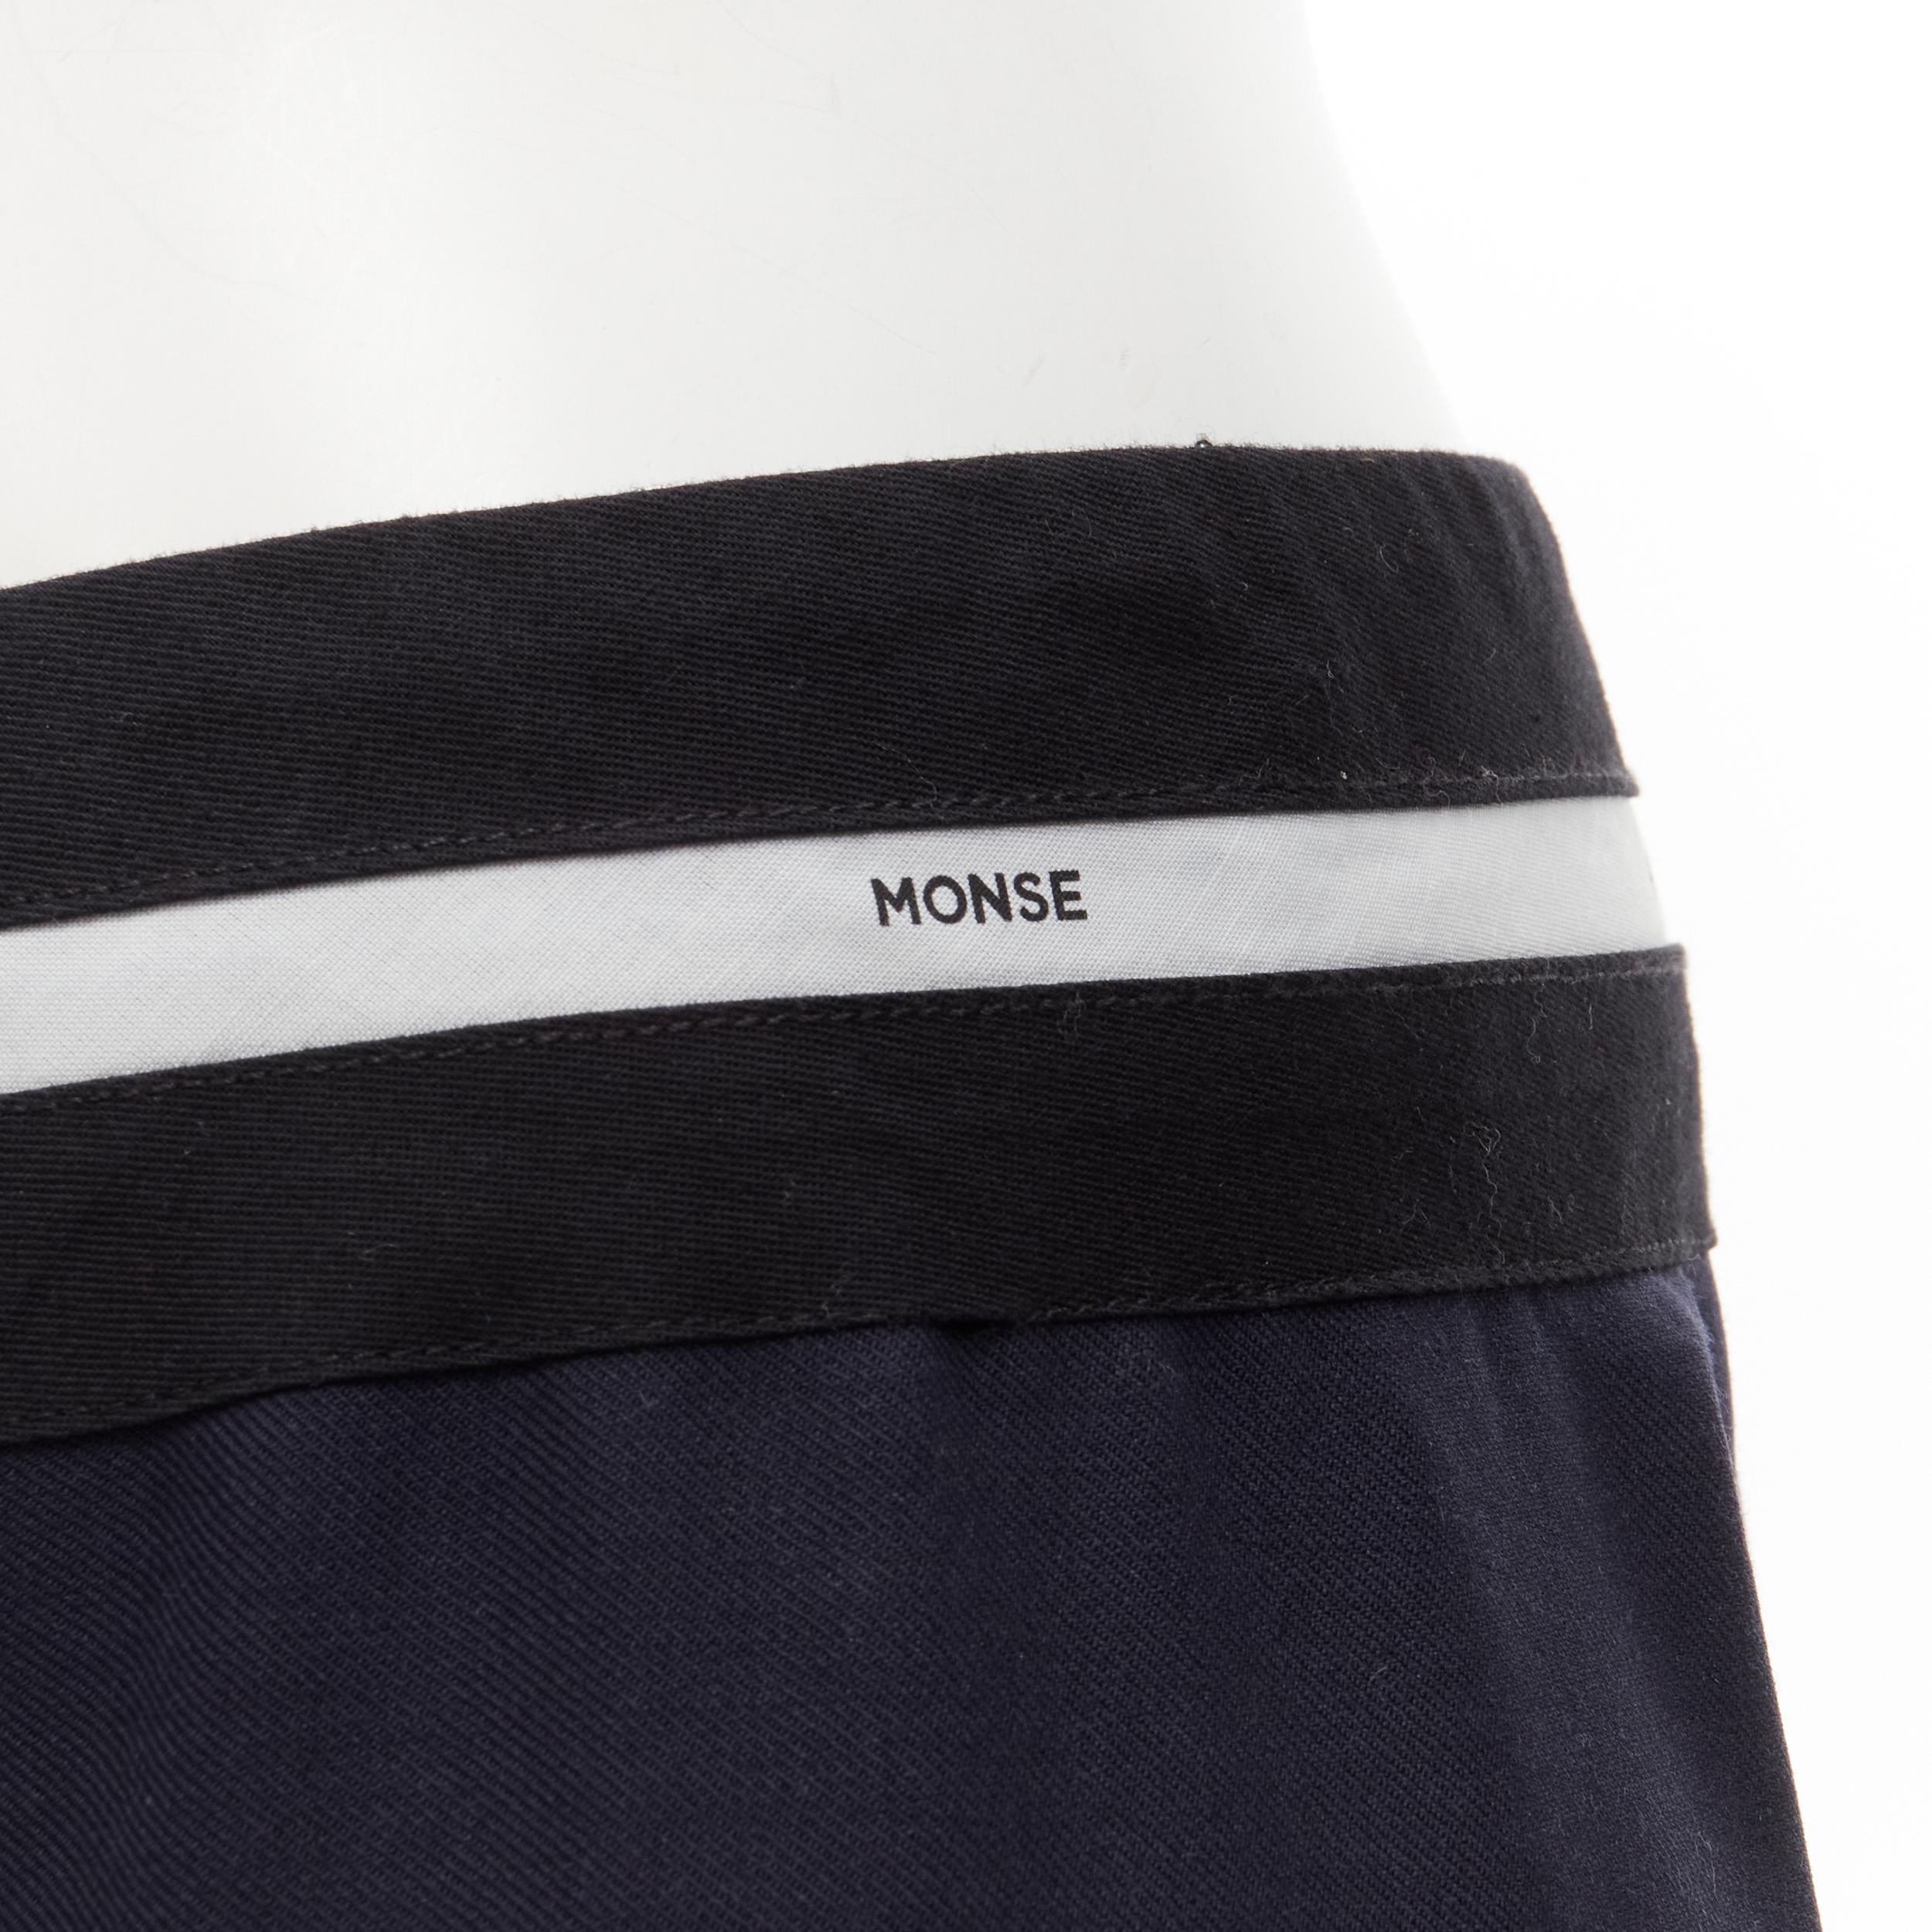 MONSE Runway mixed navy grey patchwork asymmetric skirt US4 S
Brand: Monse
Material: Wool
Color: Navy
Pattern: Solid
Extra Detail: Logo trim at waistband. Asymmetric hemline with contrast 'lining' fabric layered.
Made in: United